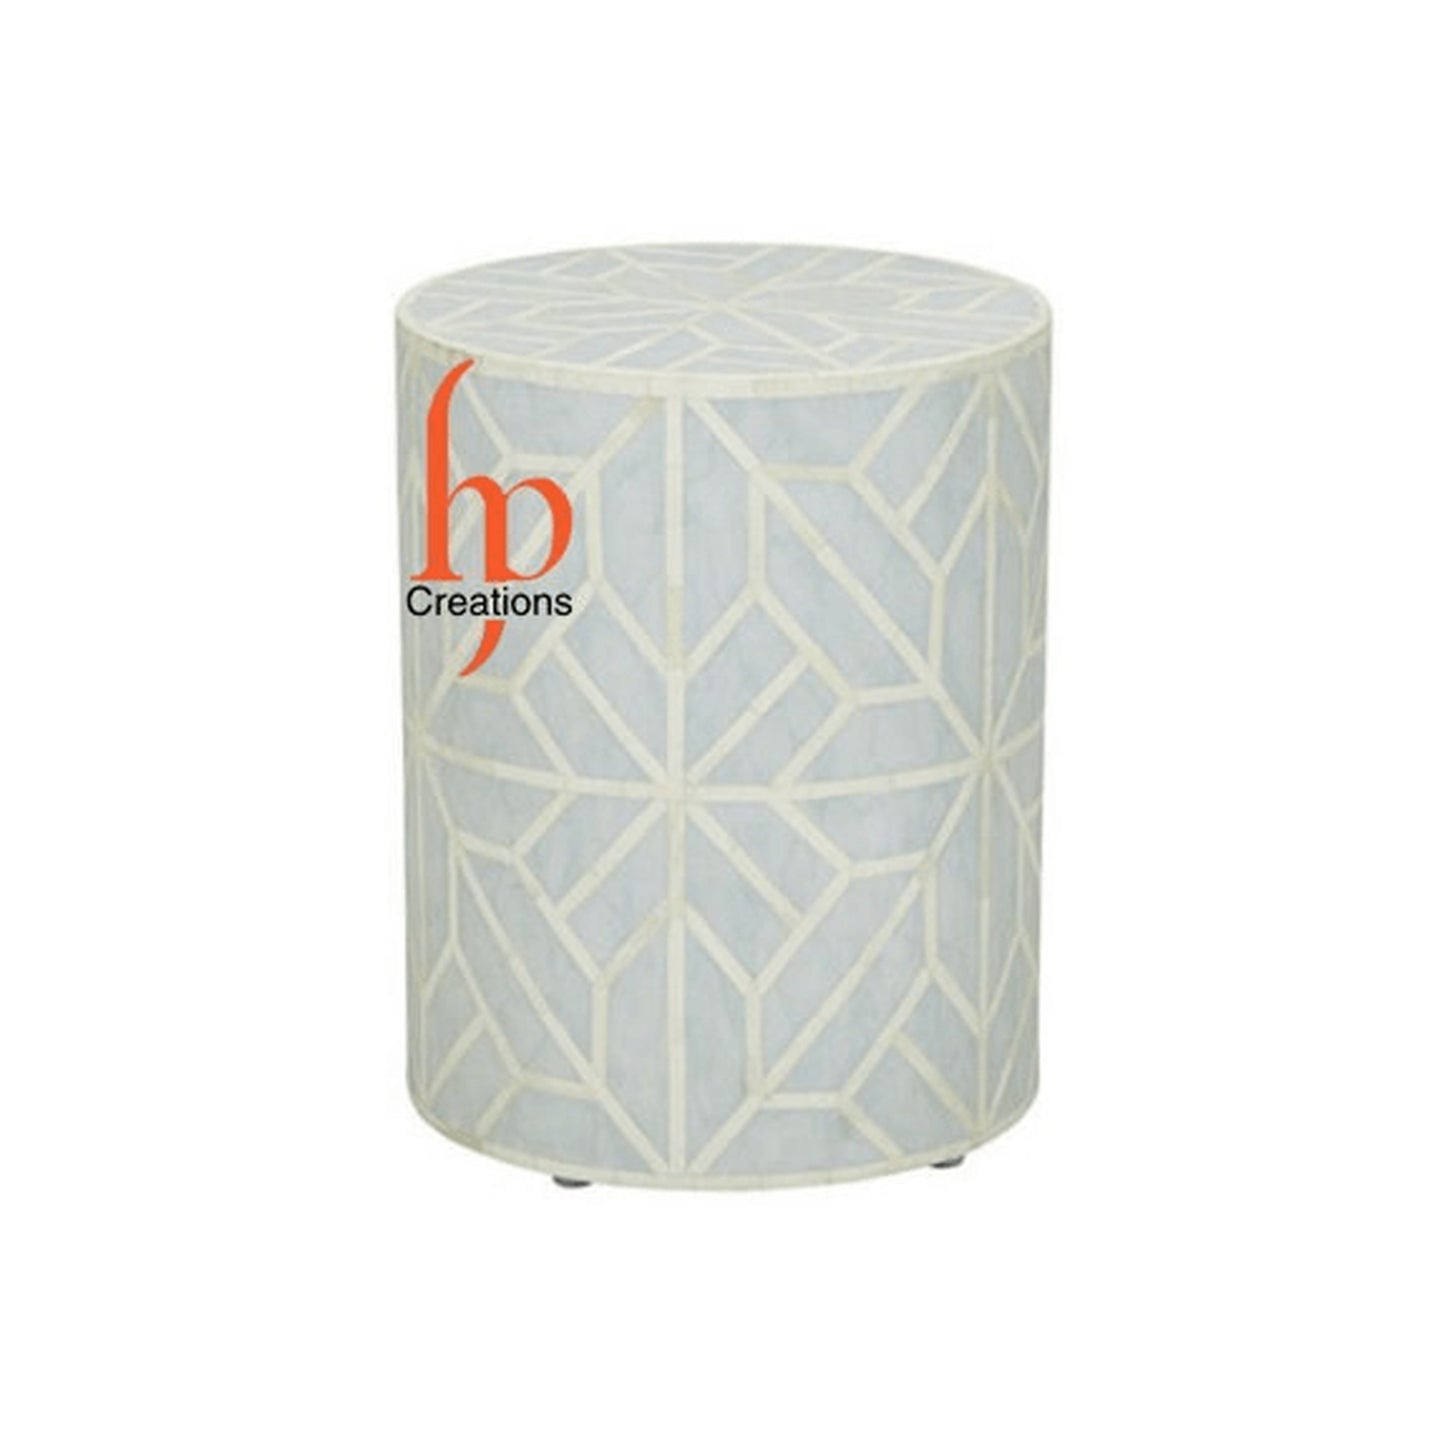 Personalized Bone Inlay Geometric Design EndTable,Drum Shape Side Table,Night Stands Available in Light Blue Light Pink & all Colors